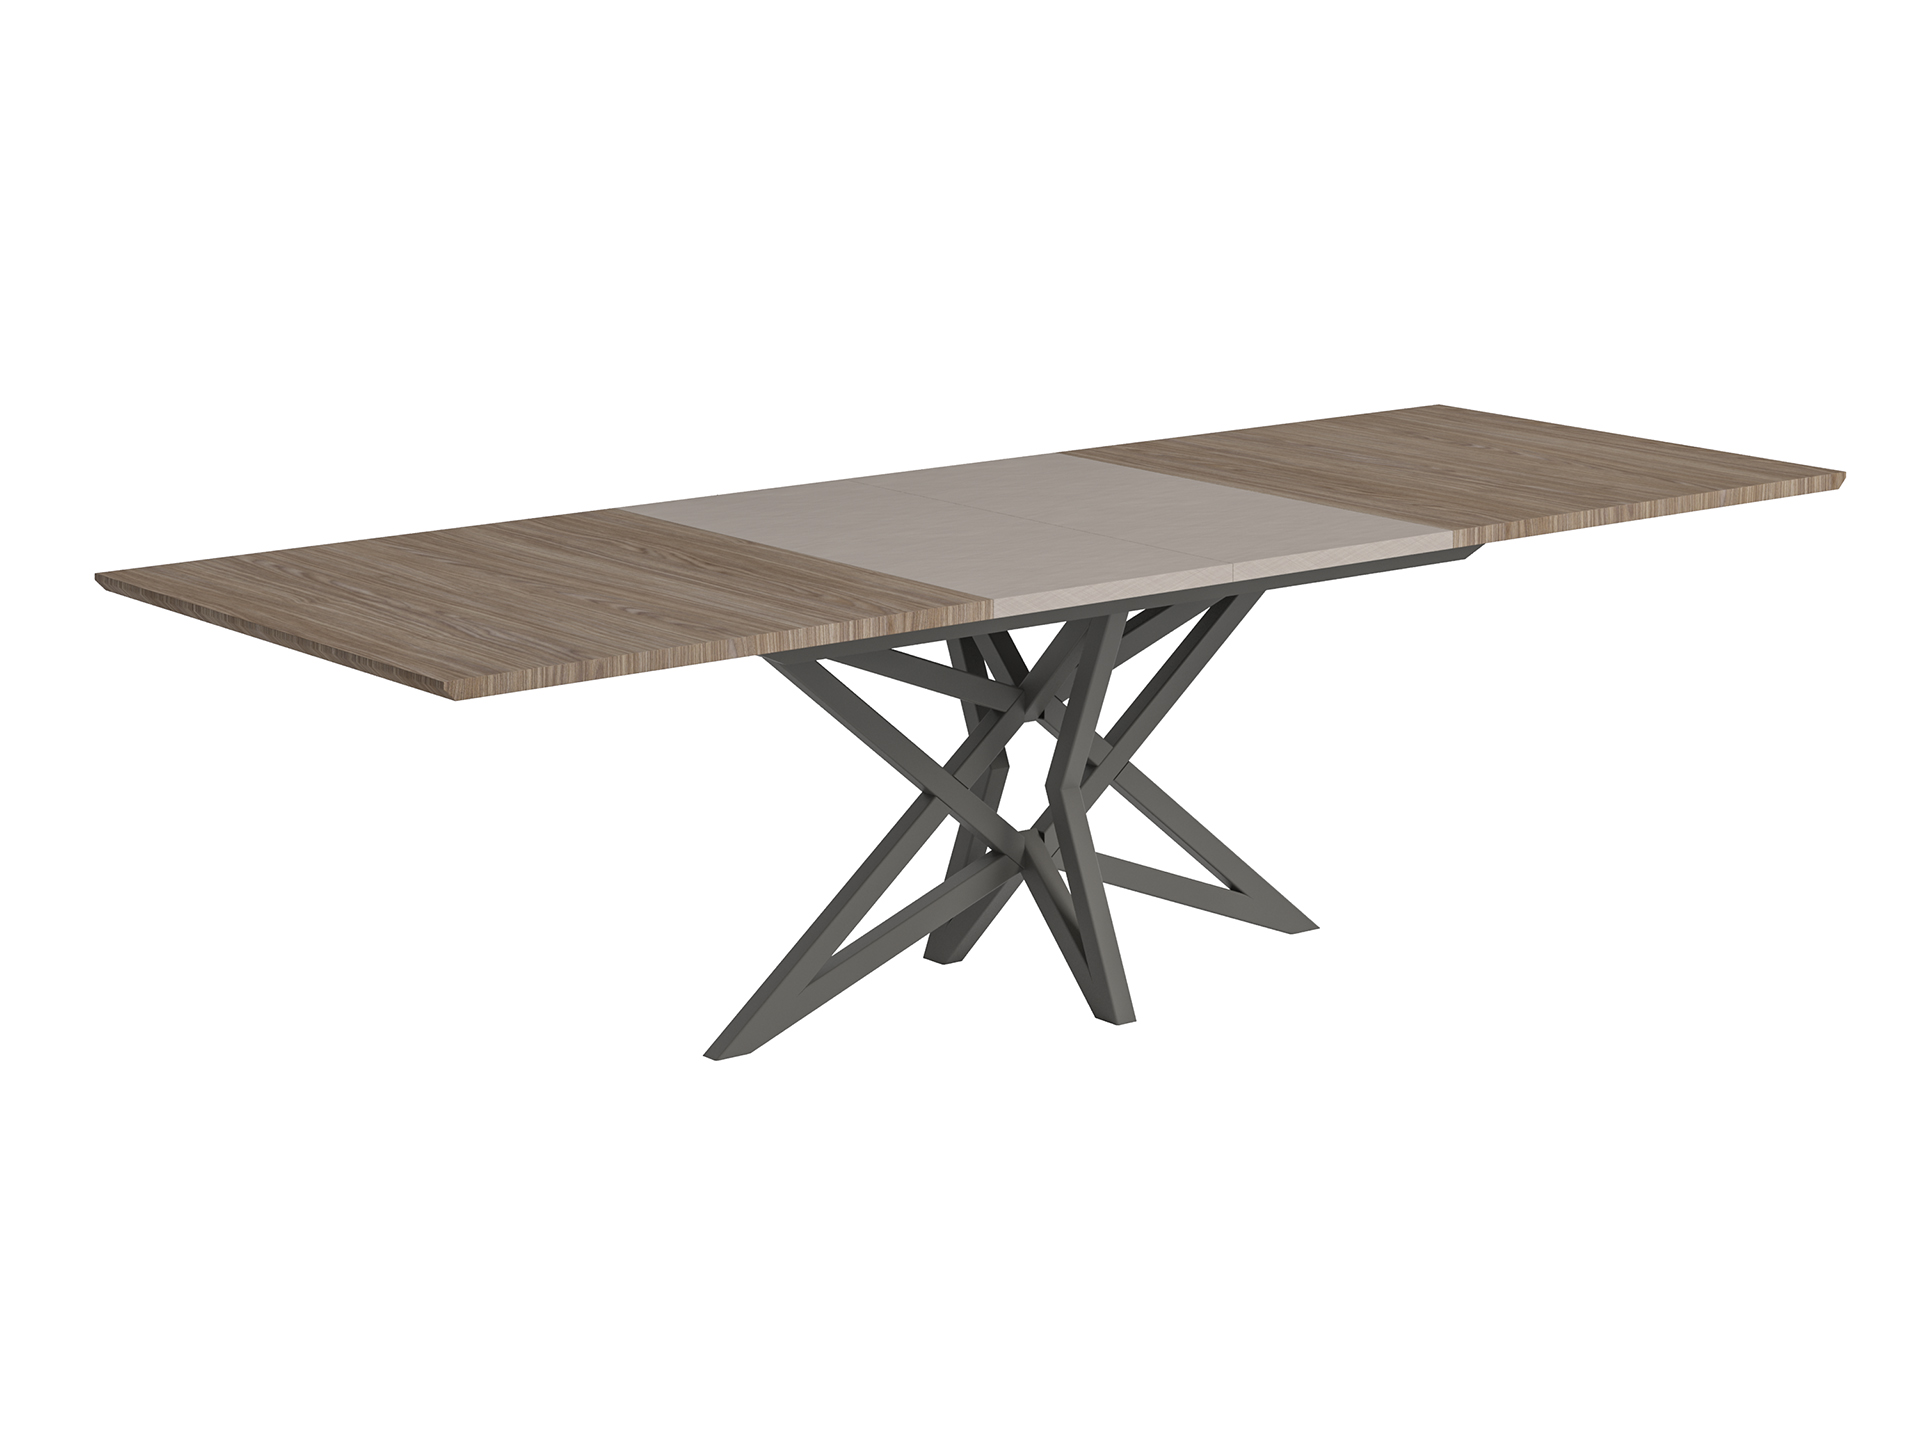 Brands Status Modern Collections, Italy Nora Dining table